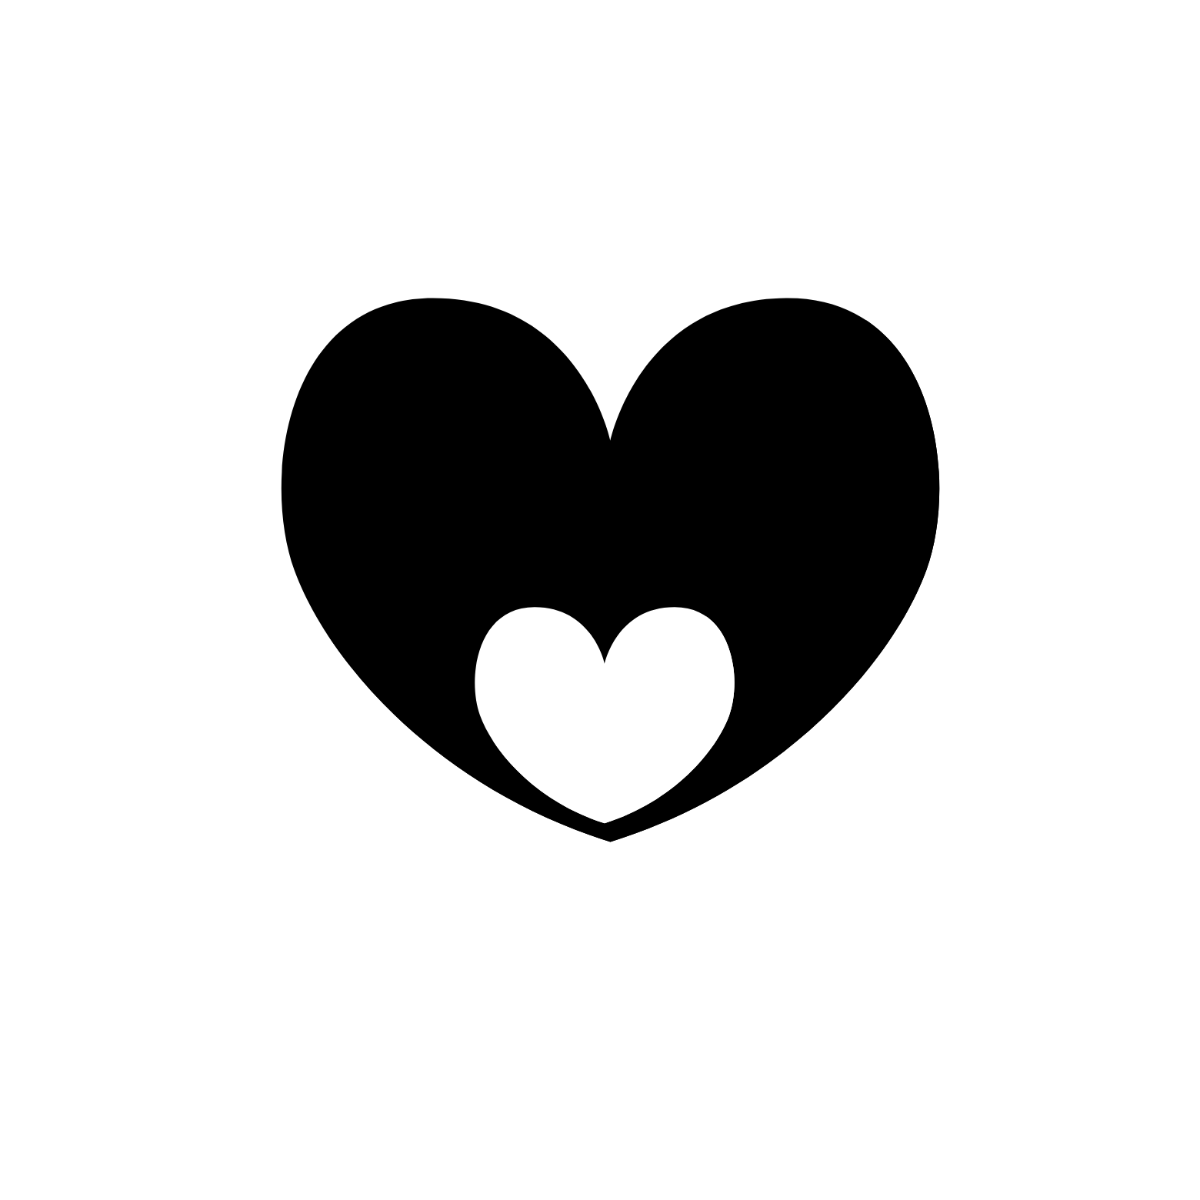 Black and White Heart Silhouette